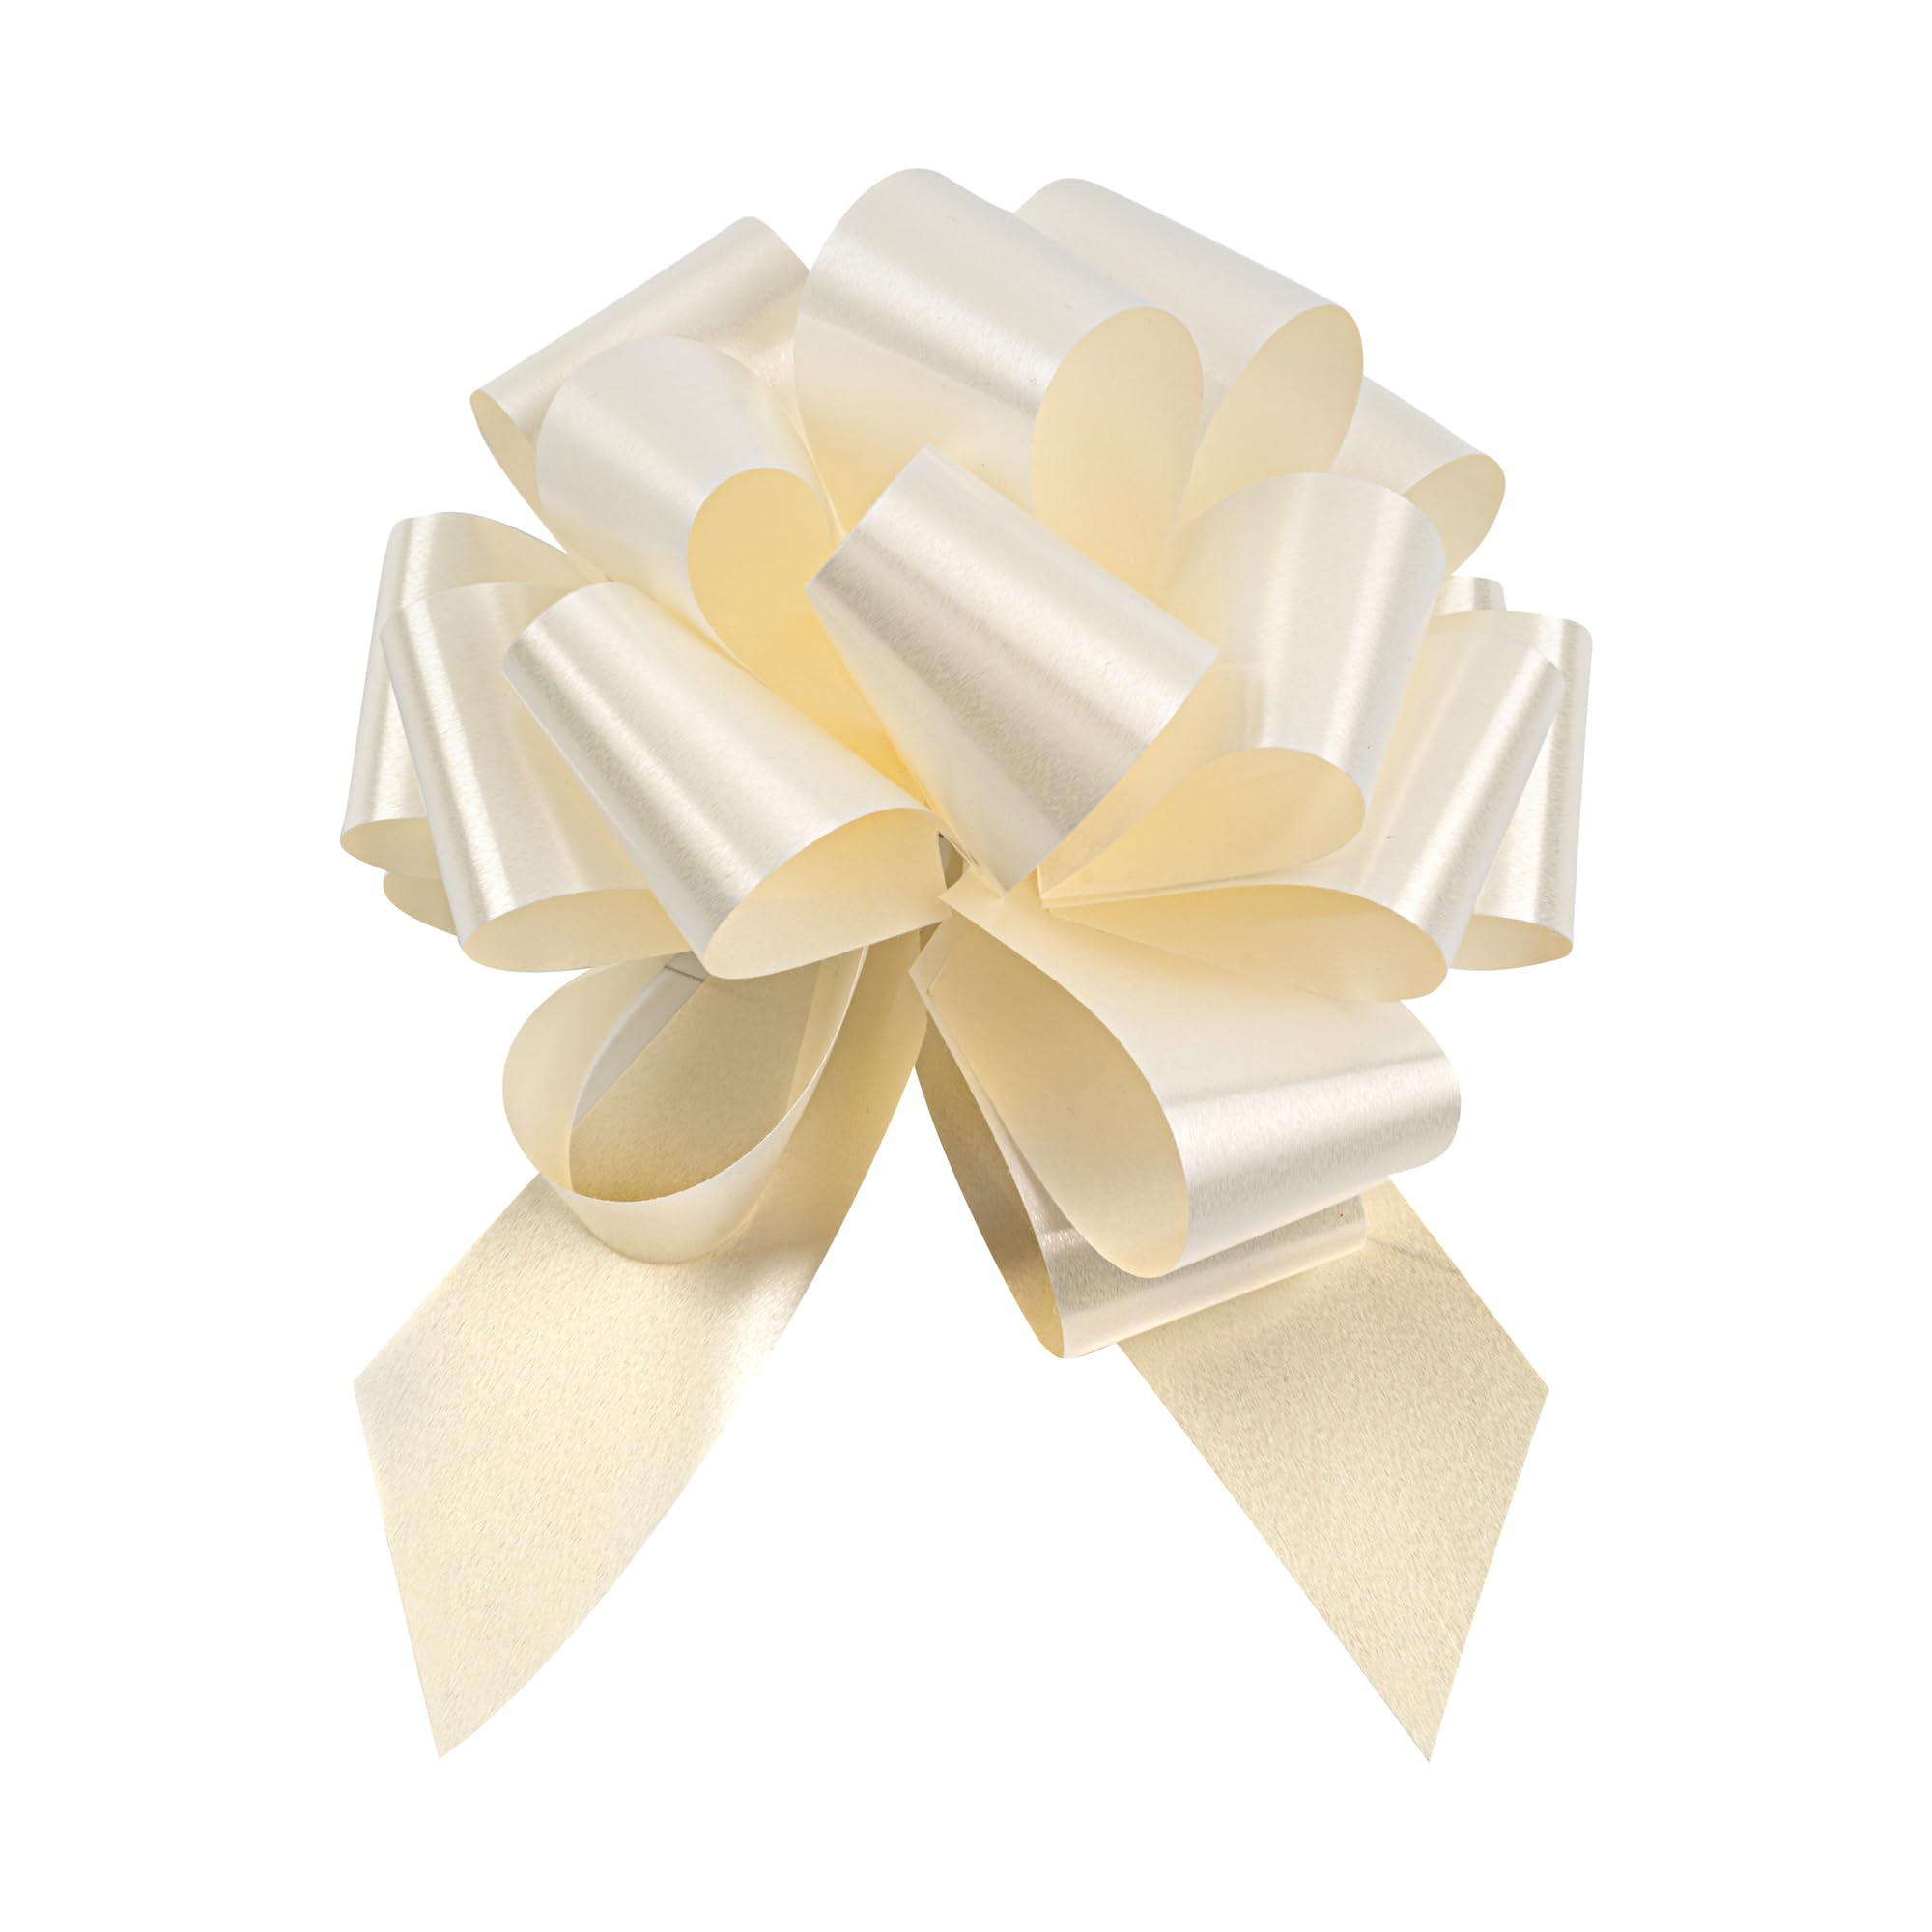 Gift Tek 5.5 Inch Ribbon Pull Bows, 10 Satin Pull Bows - 20 Loops, Instant, Cream Plastic Flower Bows for Gifts, Large, Instant Bows, for Wedding Gift Baskets, Wraps - Restaurantware